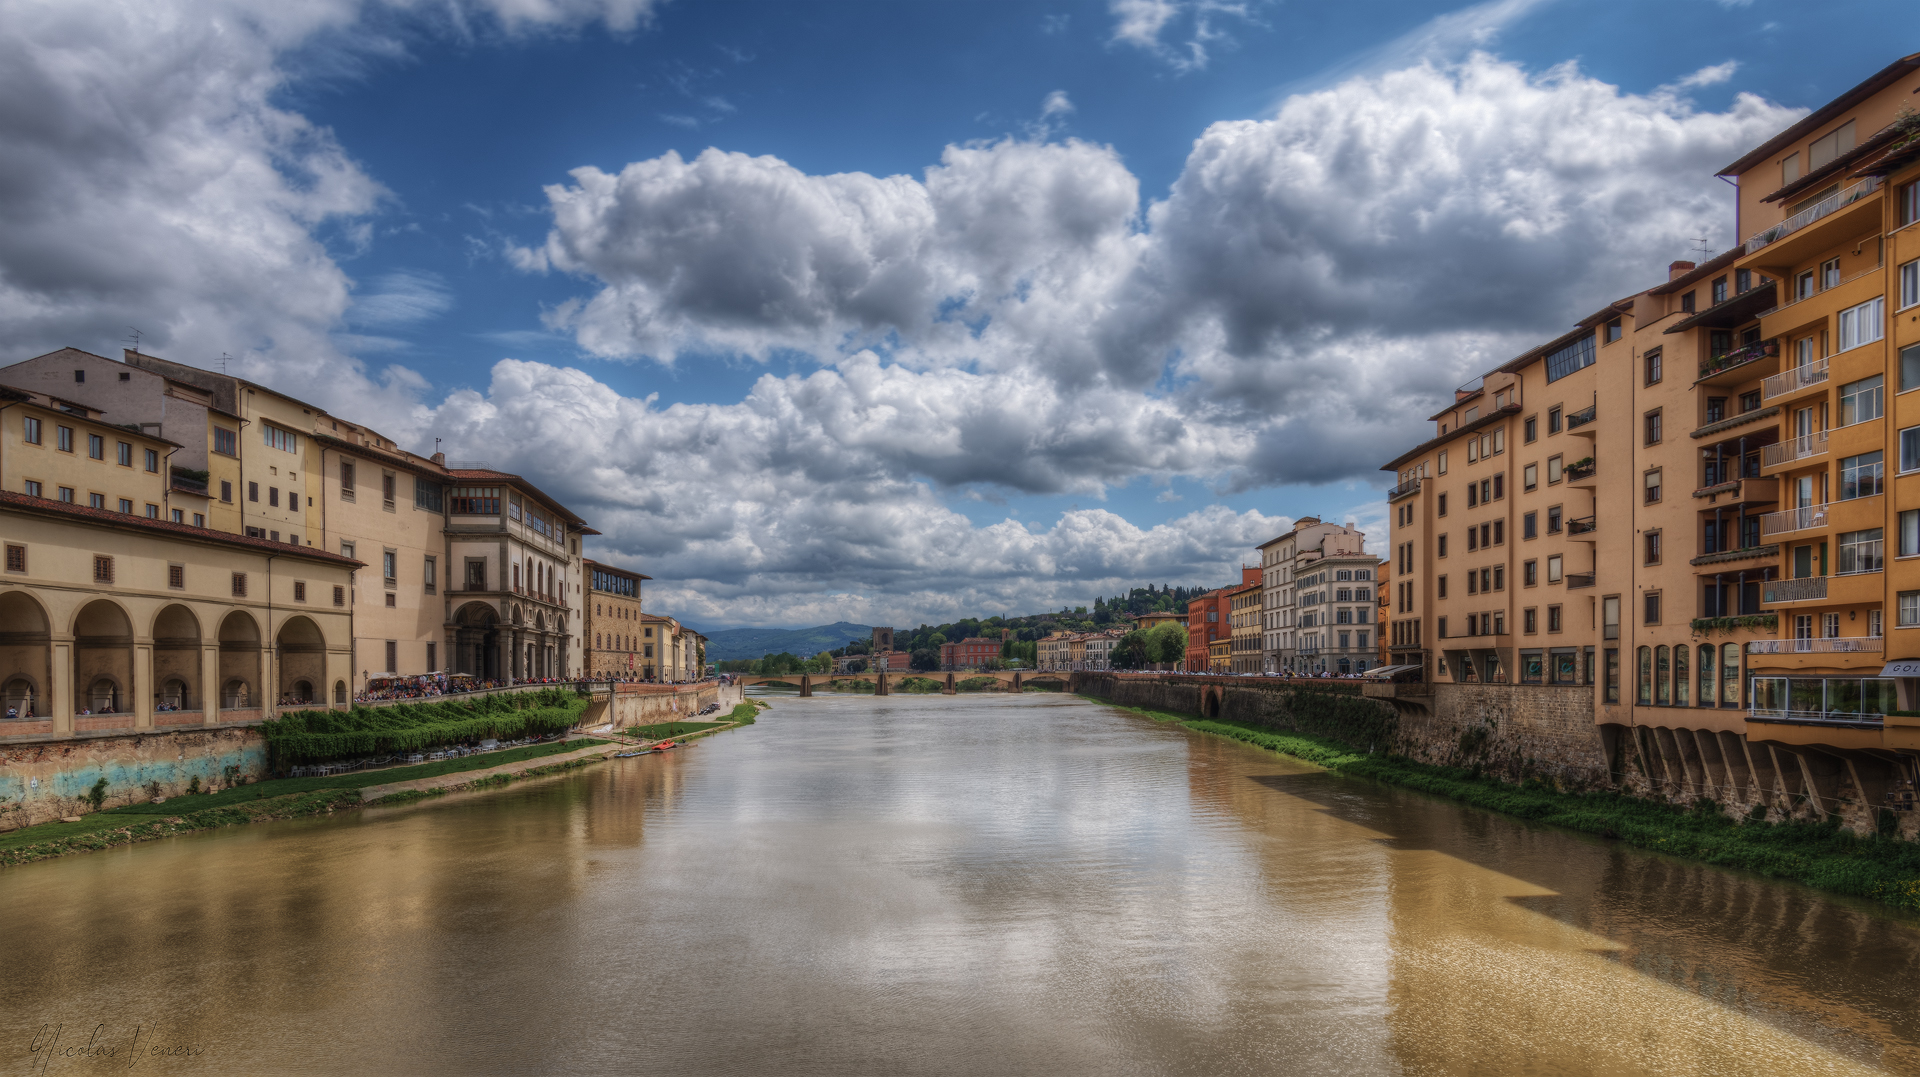 THE VIEW FROM PONTE VECCHIO ...